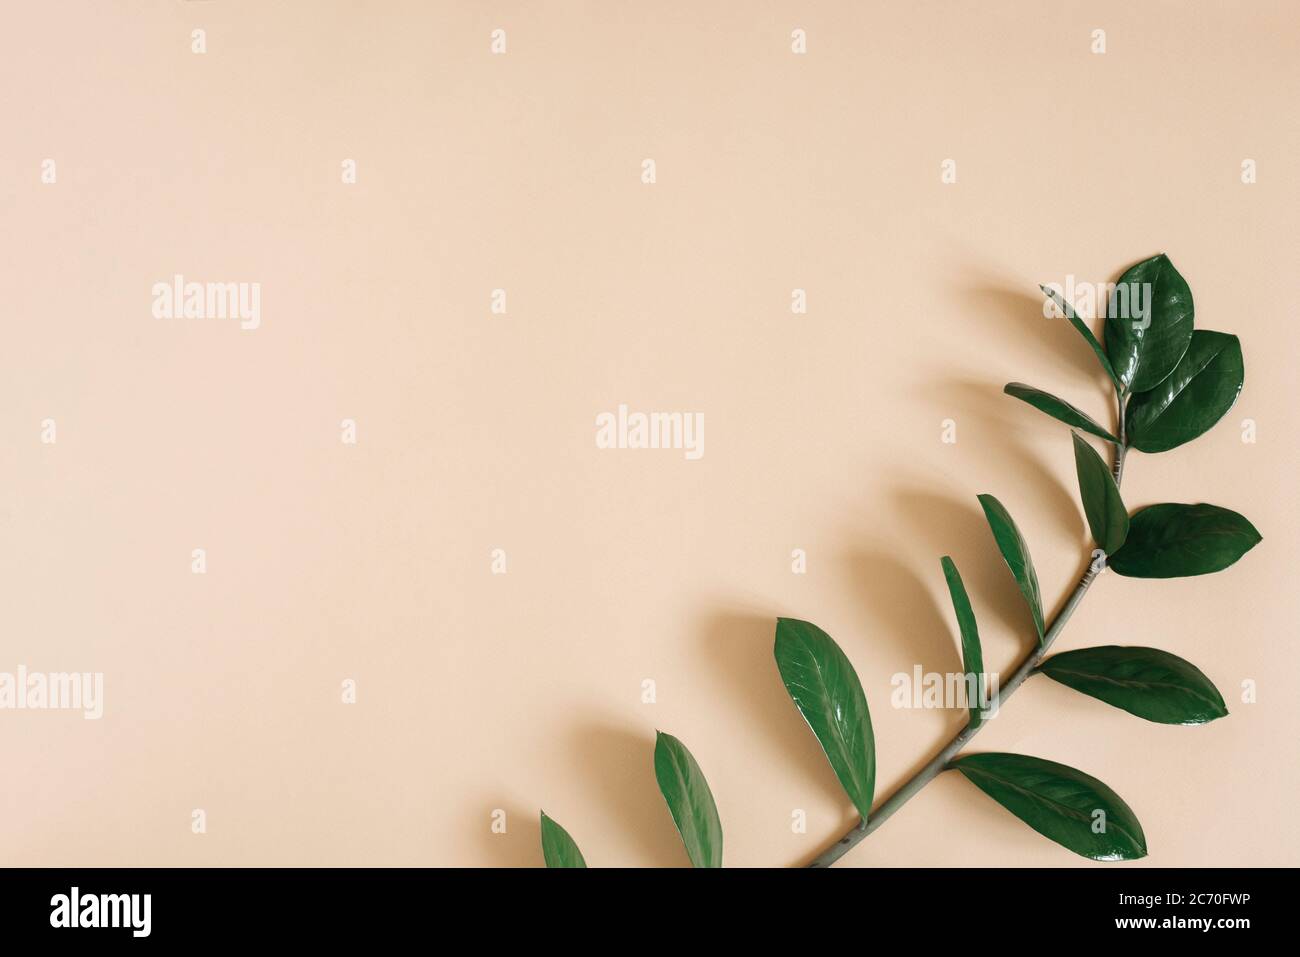 A branch of a green tropical plant zamiokulkas on a beige background with a copy space Stock Photo